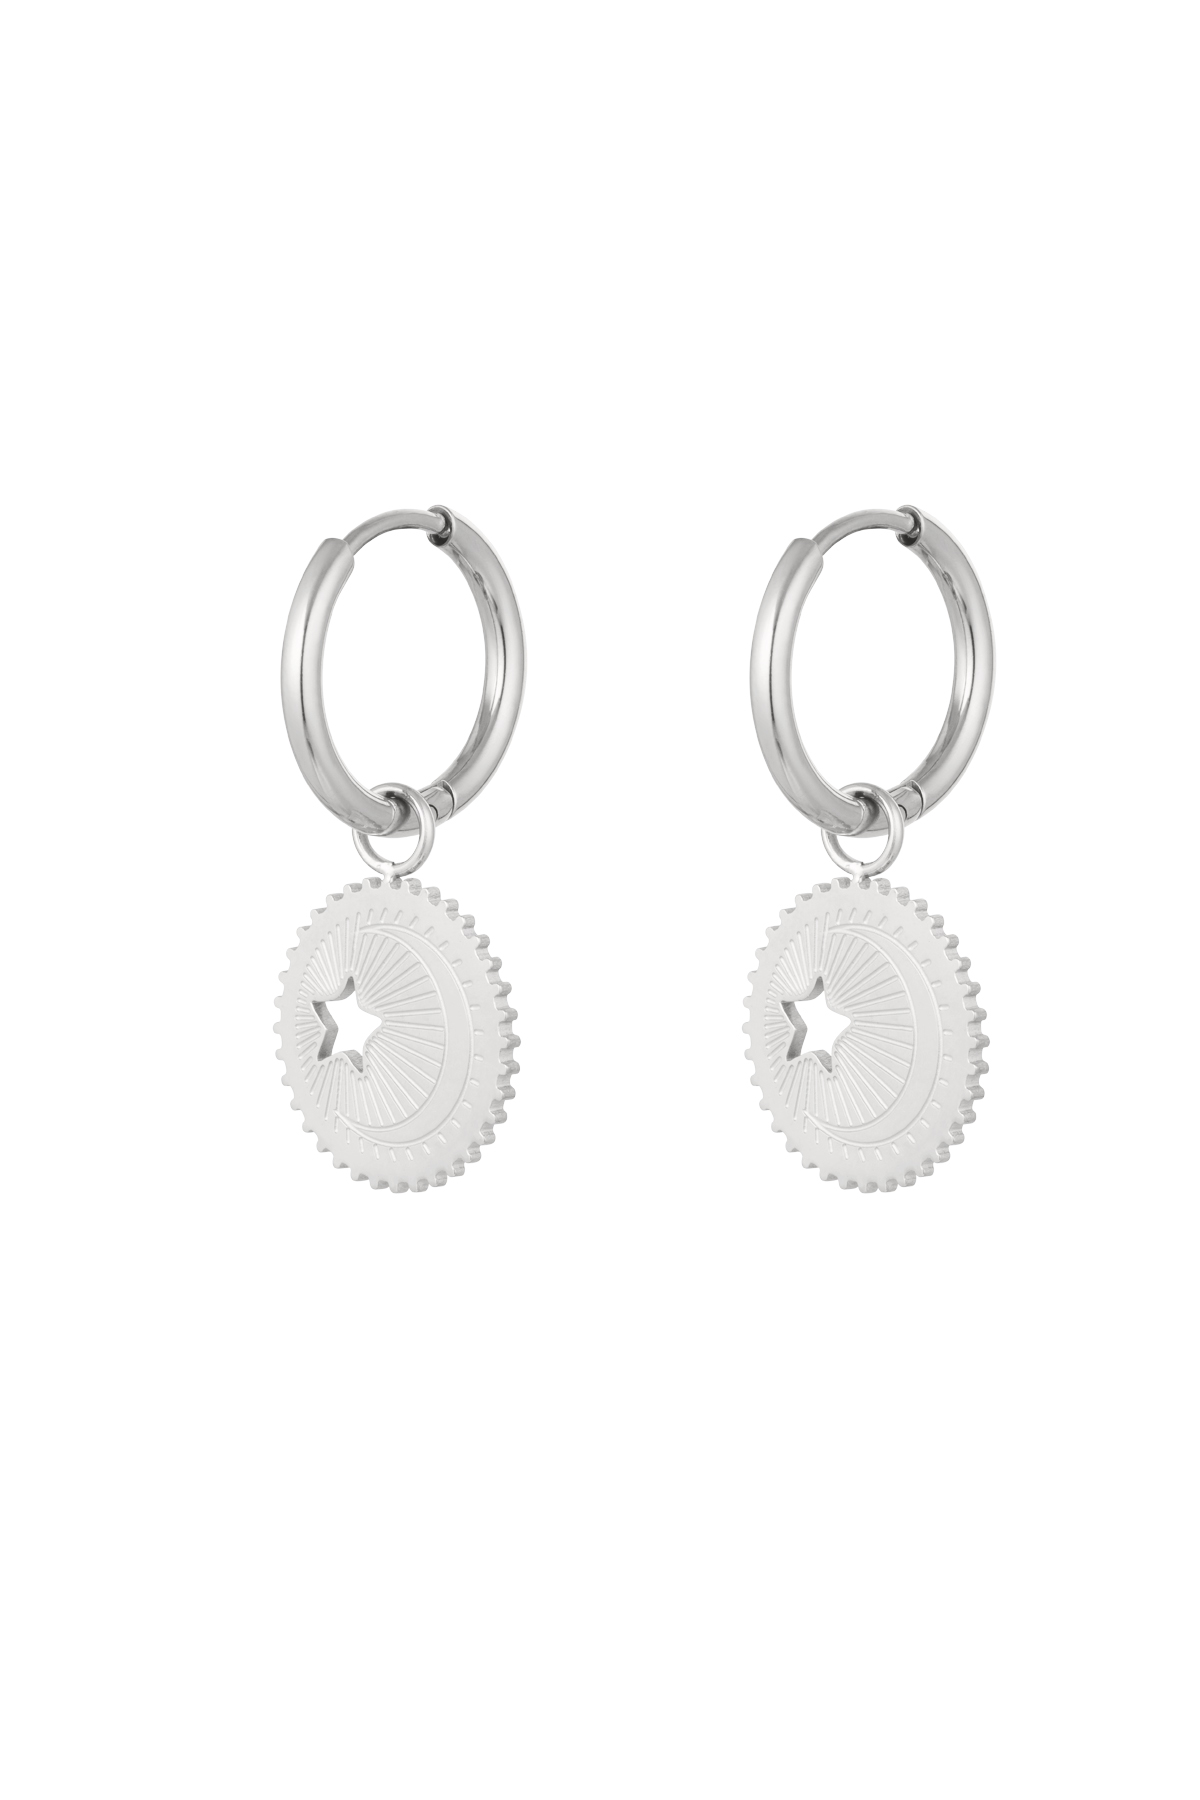 Earrings star coin - silver Stainless Steel h5 